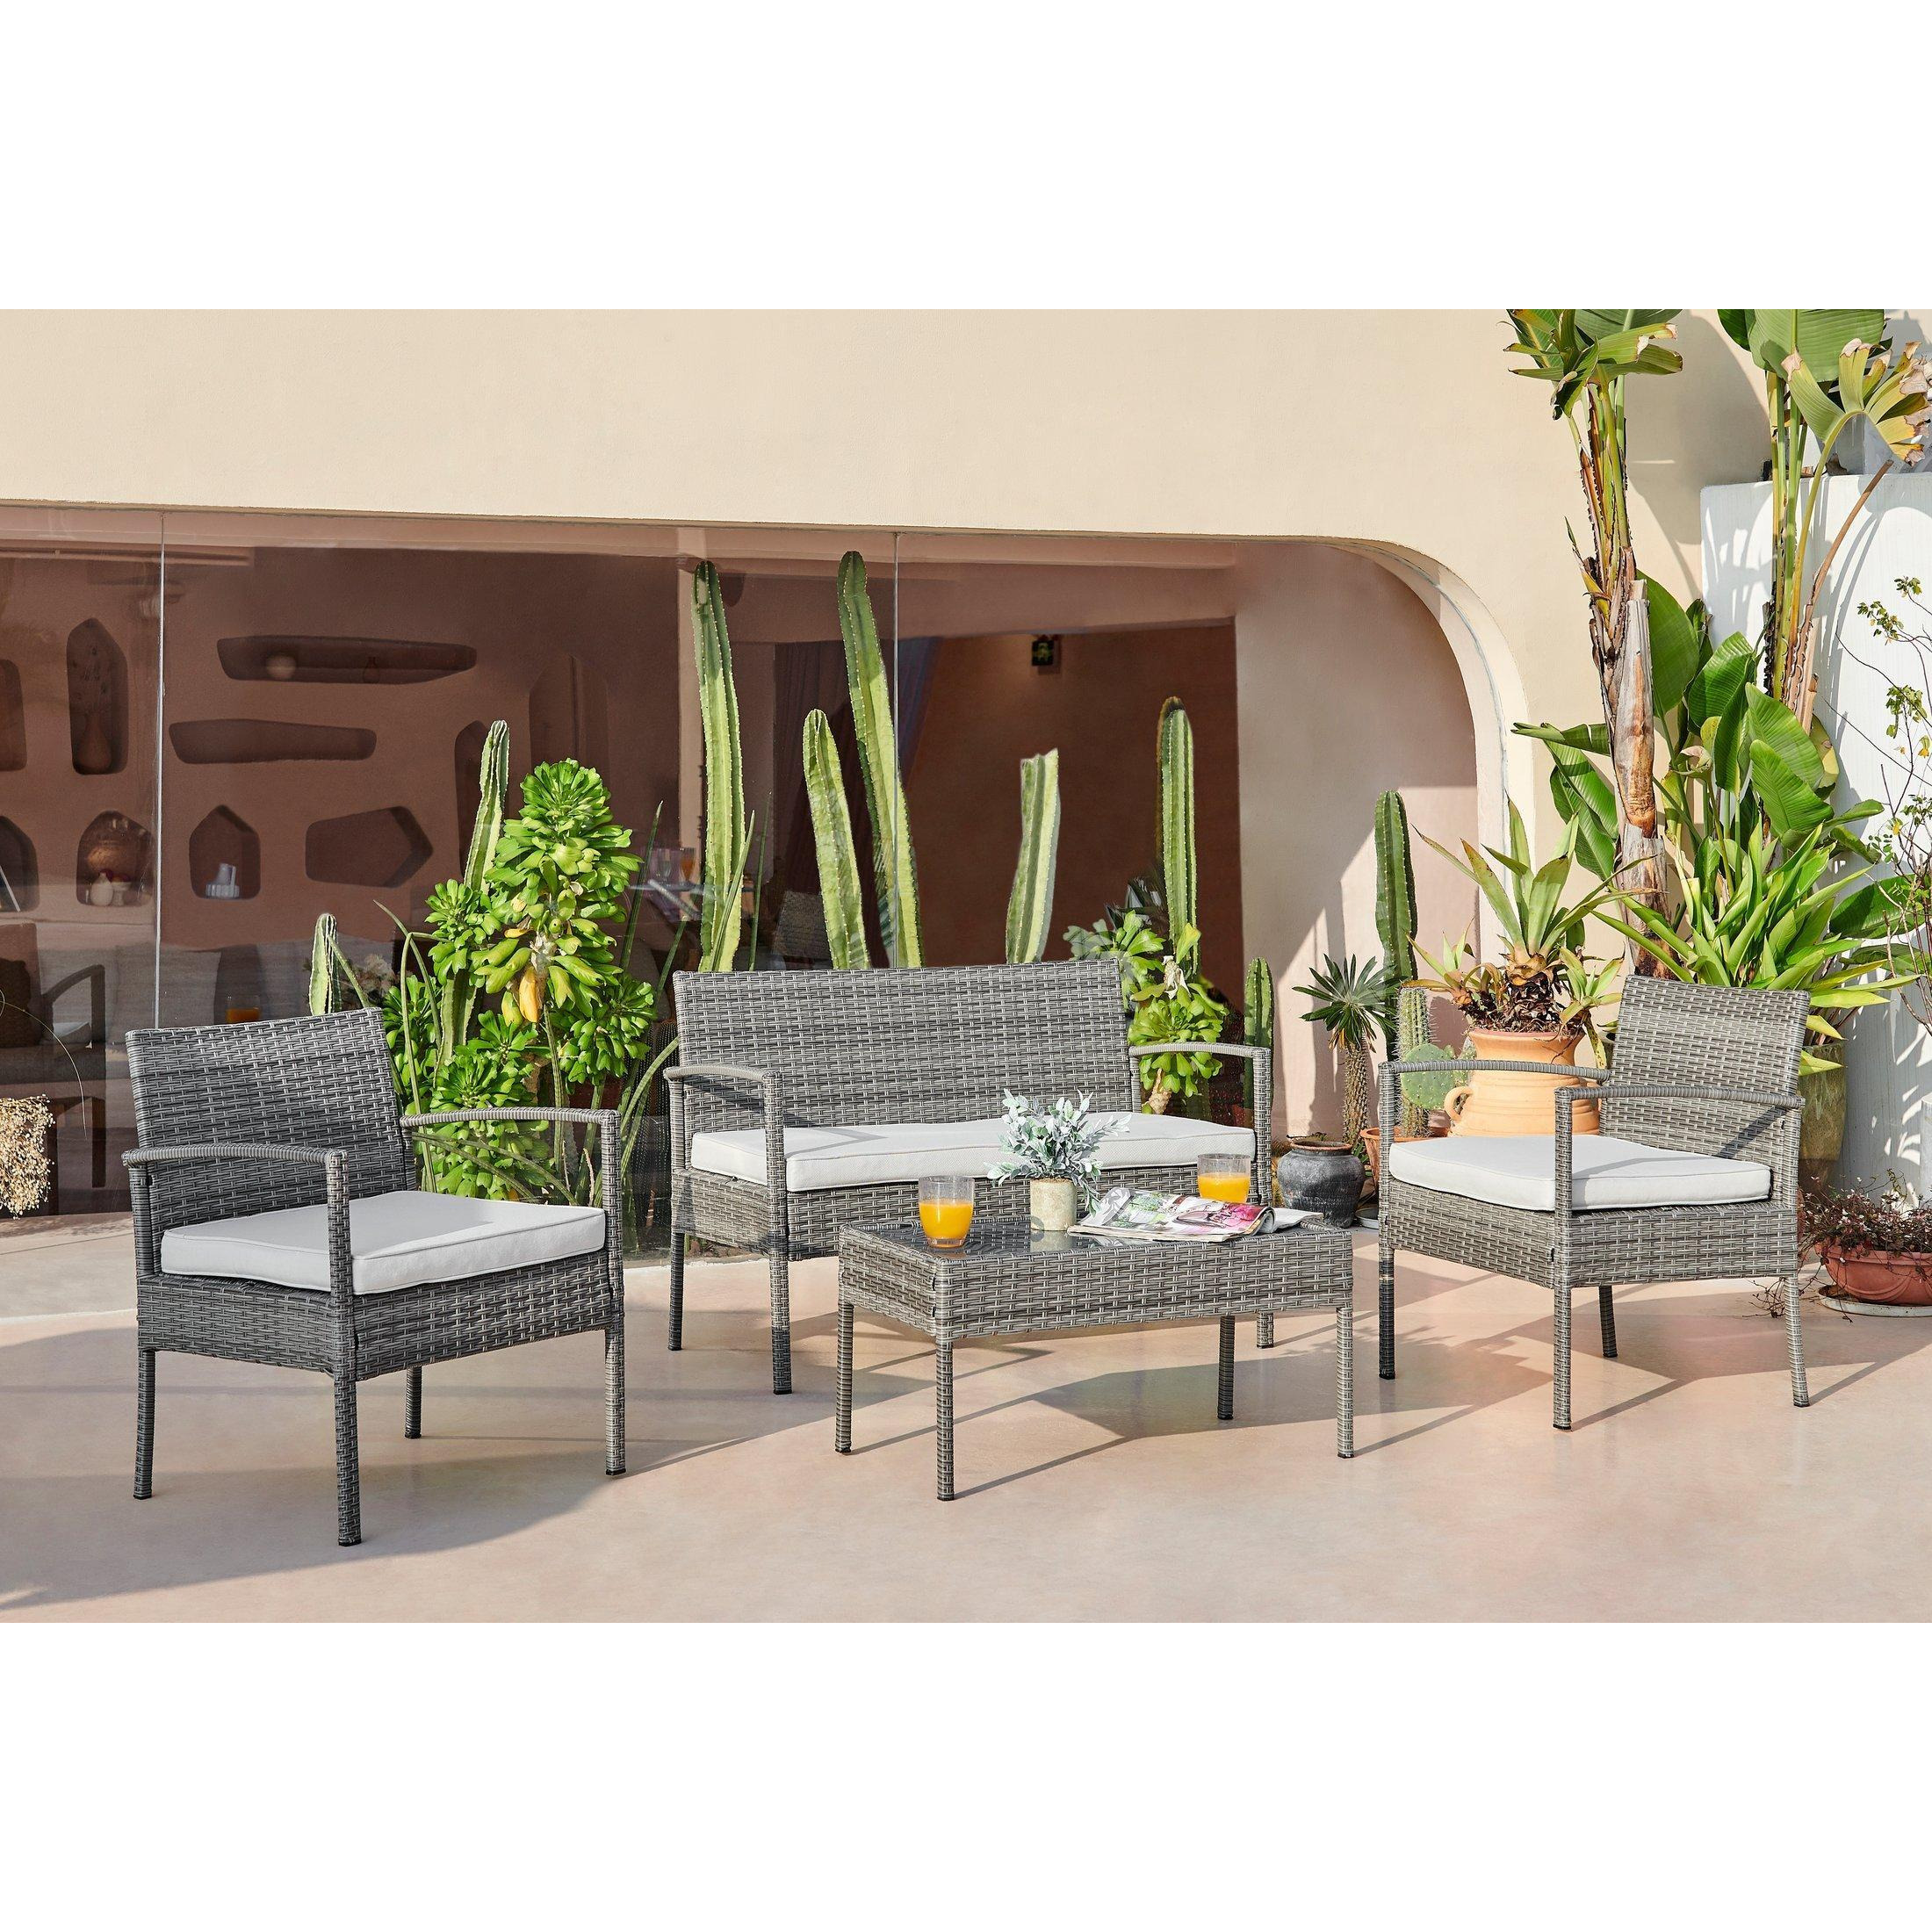 Porto Grey PE Rattan Outdoor Garden 4 Seat Coffee Table & Chairs Set, 2 Chairs 2 Seater Garden Bench - image 1